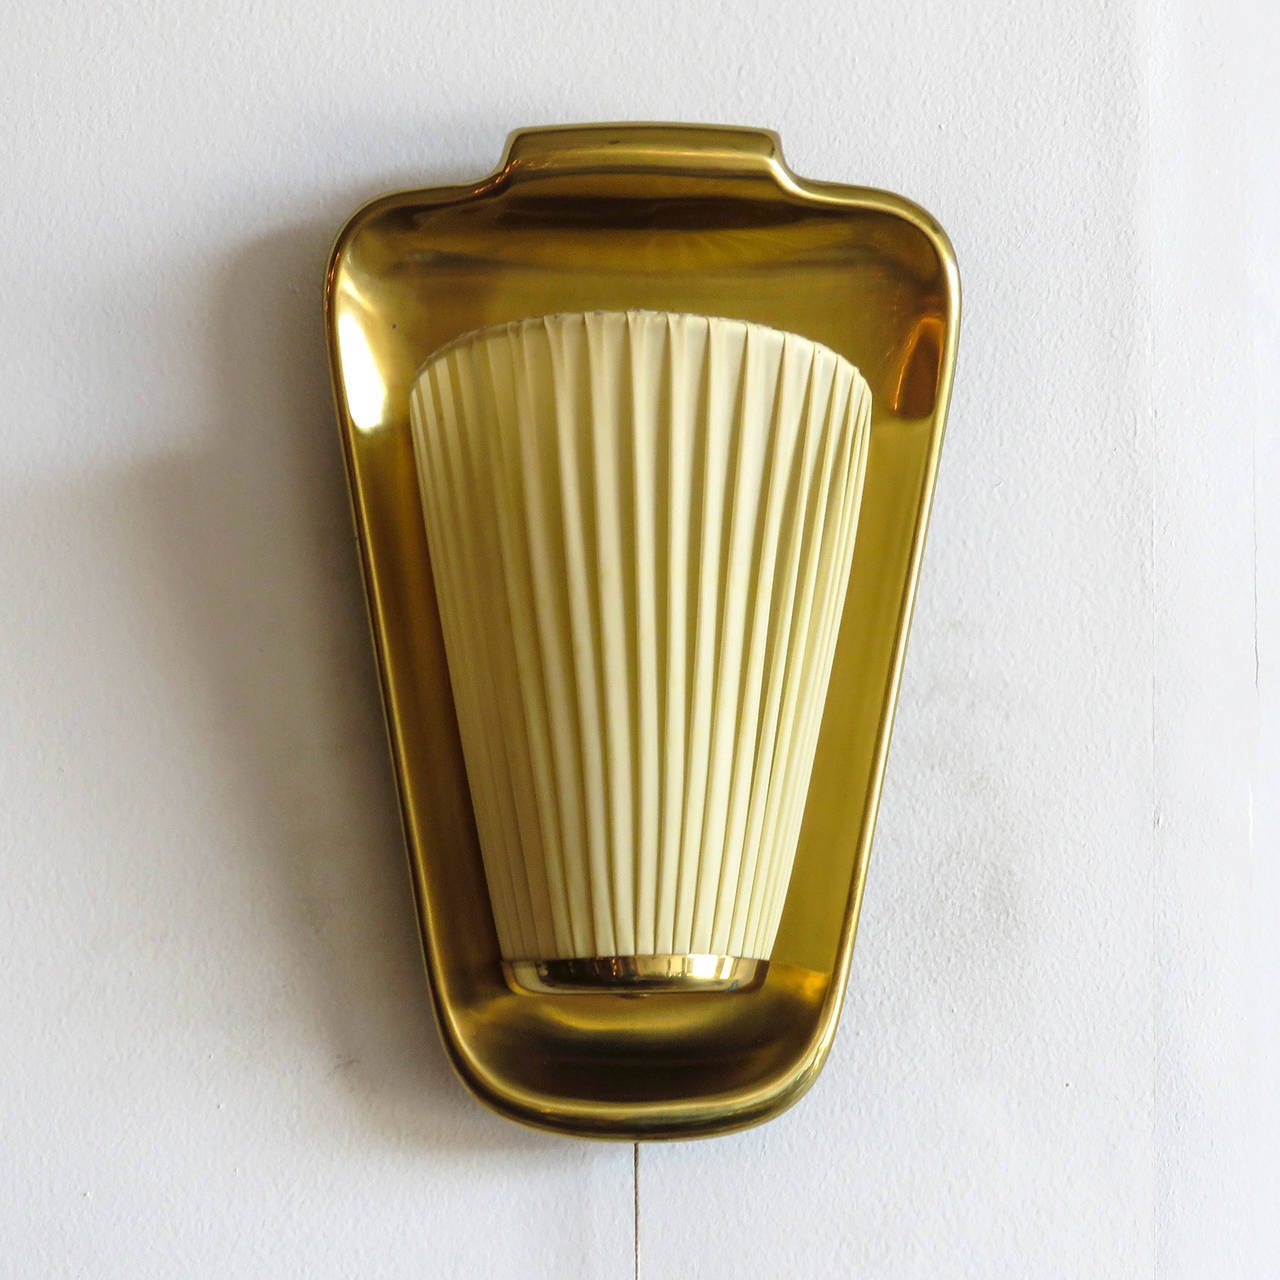 Wonderful pair of 1950s German wall sconces in brass with original pleated cloth shades, individual on and off switches.